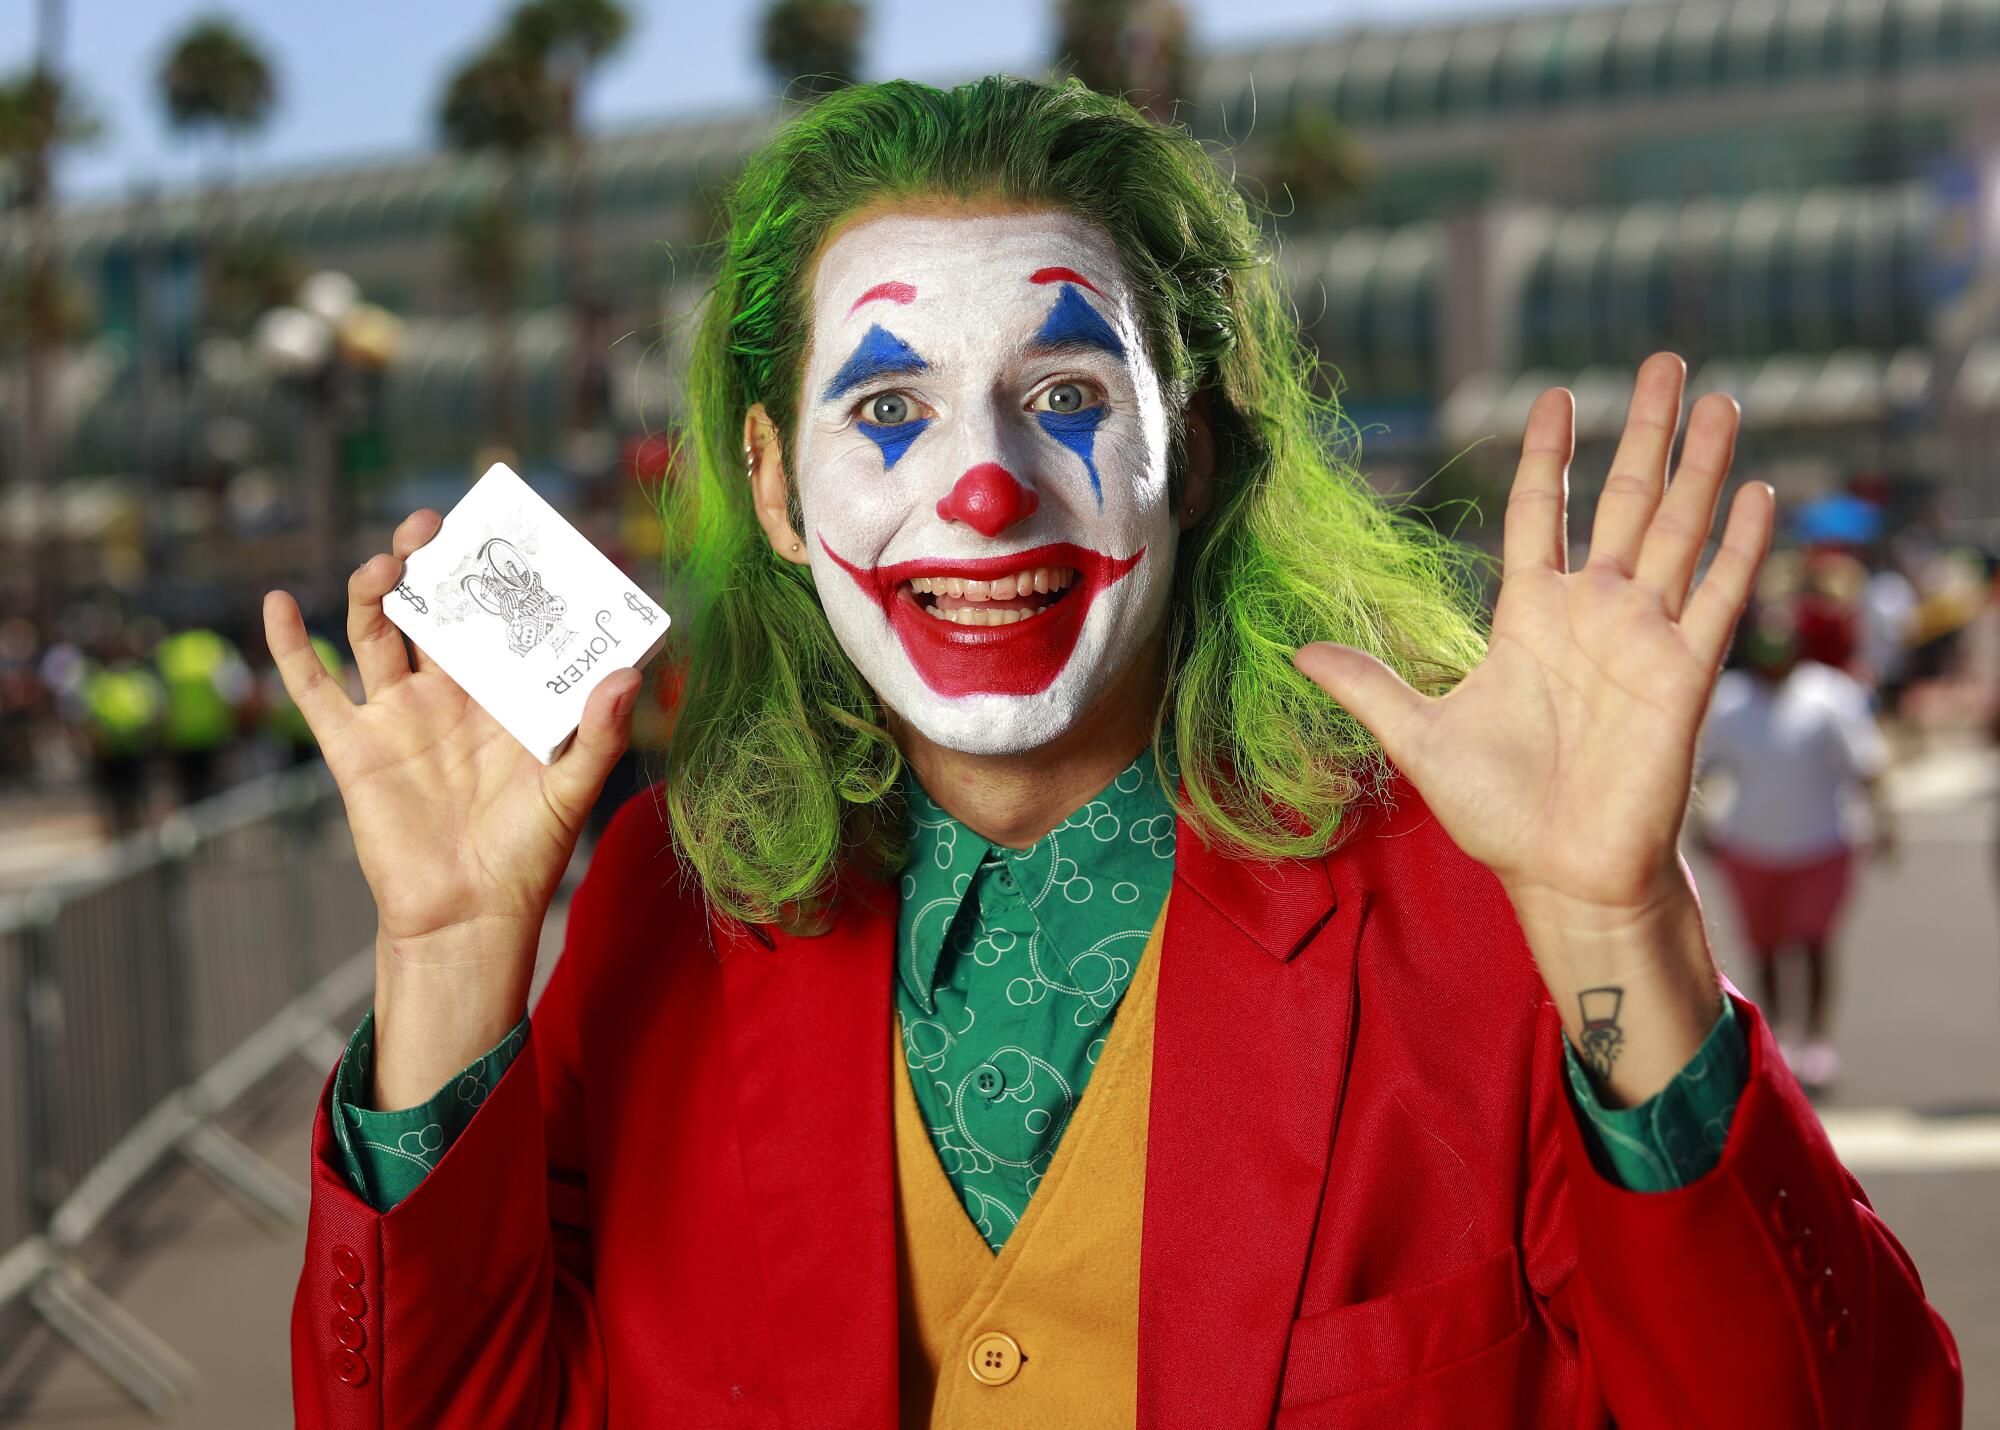 Jack Murdock of San Clemente dressed as the Joker at Comic-Con.